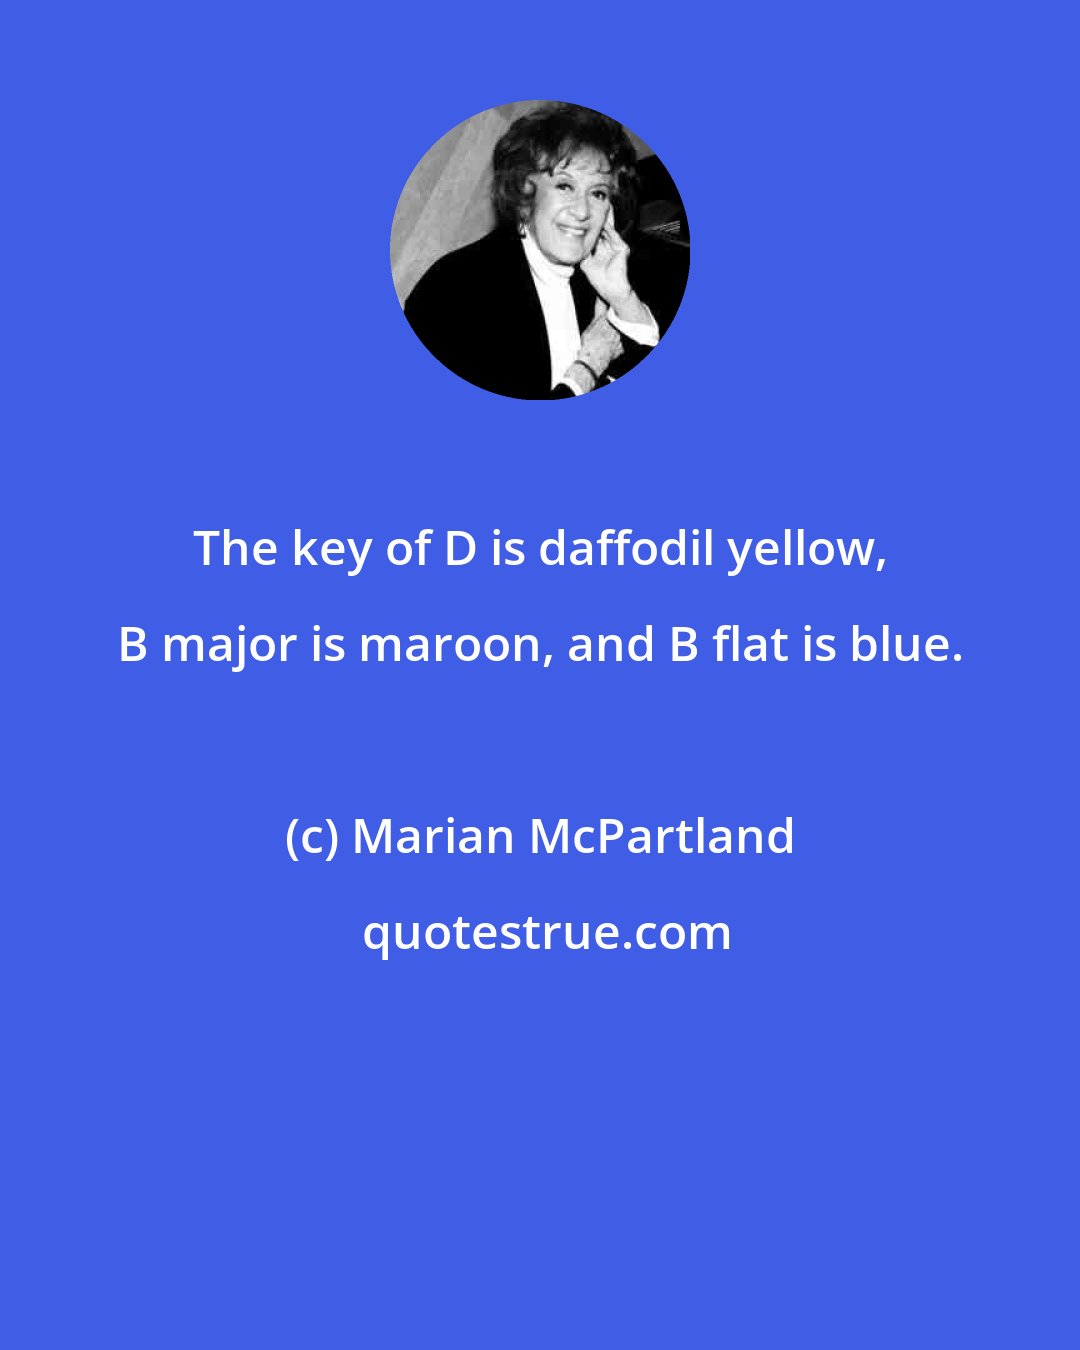 Marian McPartland: The key of D is daffodil yellow, B major is maroon, and B flat is blue.